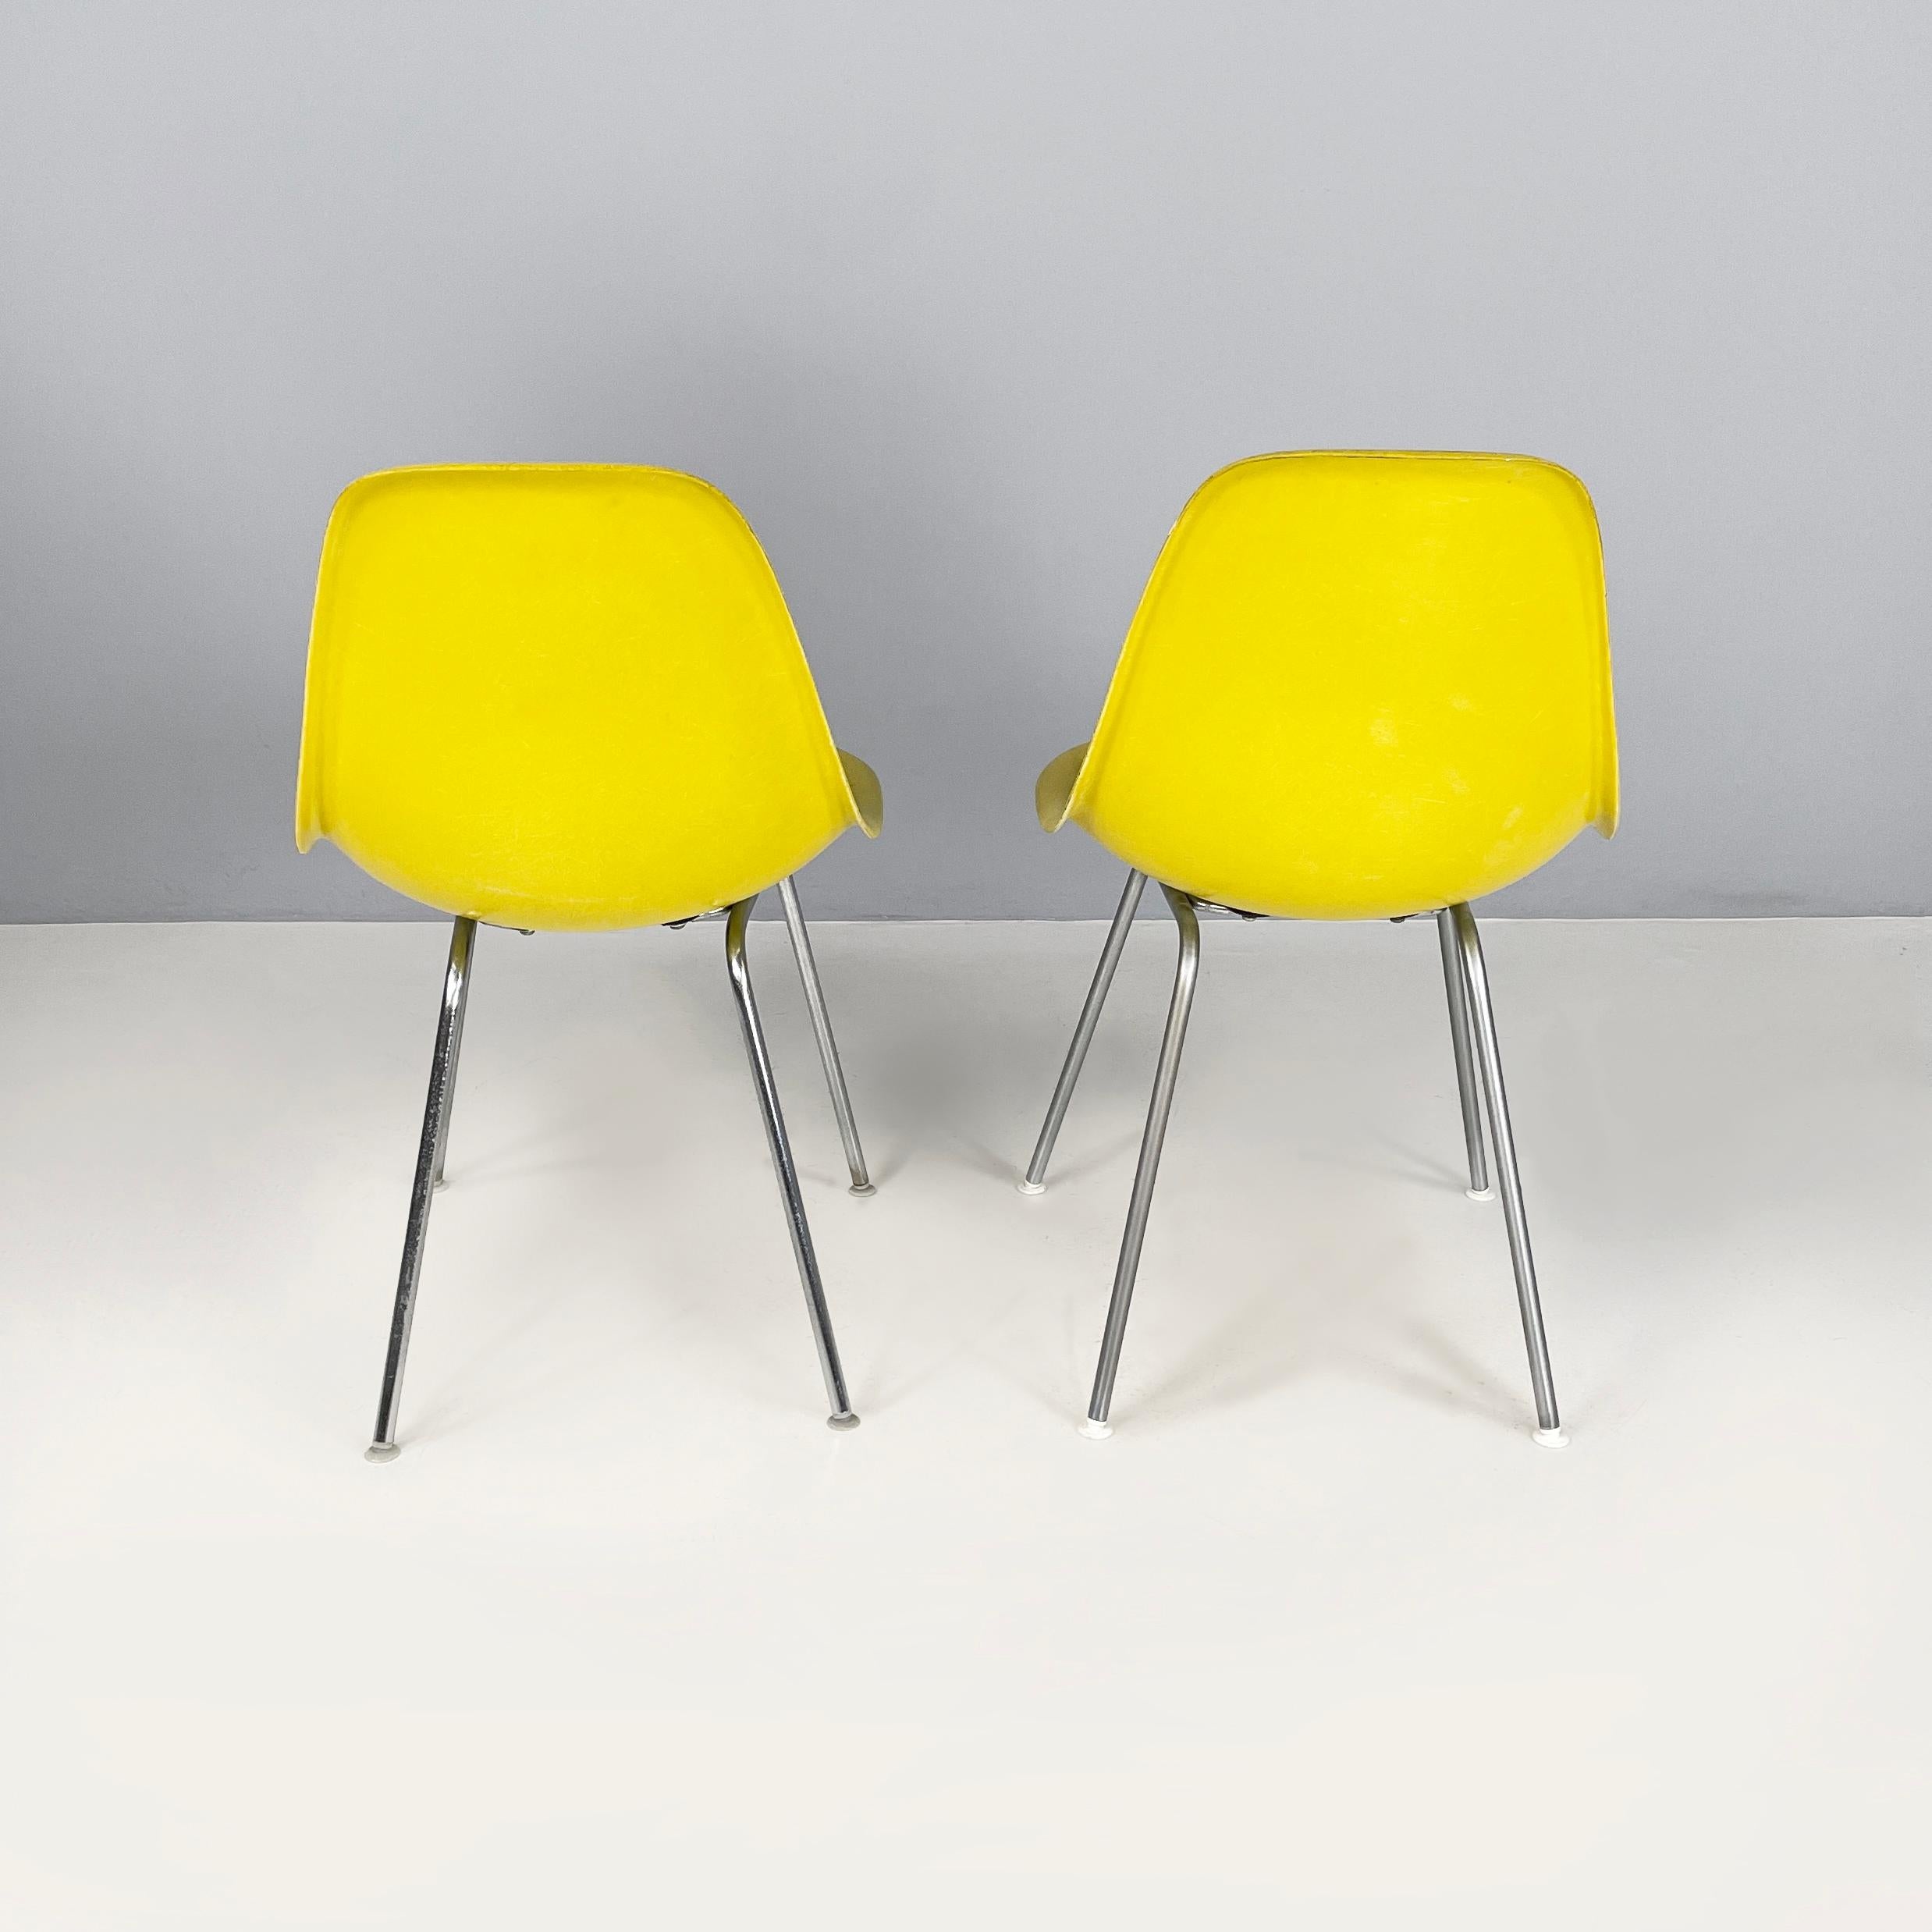 American Yellow Shell Chairs by Charles and Ray Eames for Herman Miller, 1970s In Good Condition For Sale In MIlano, IT